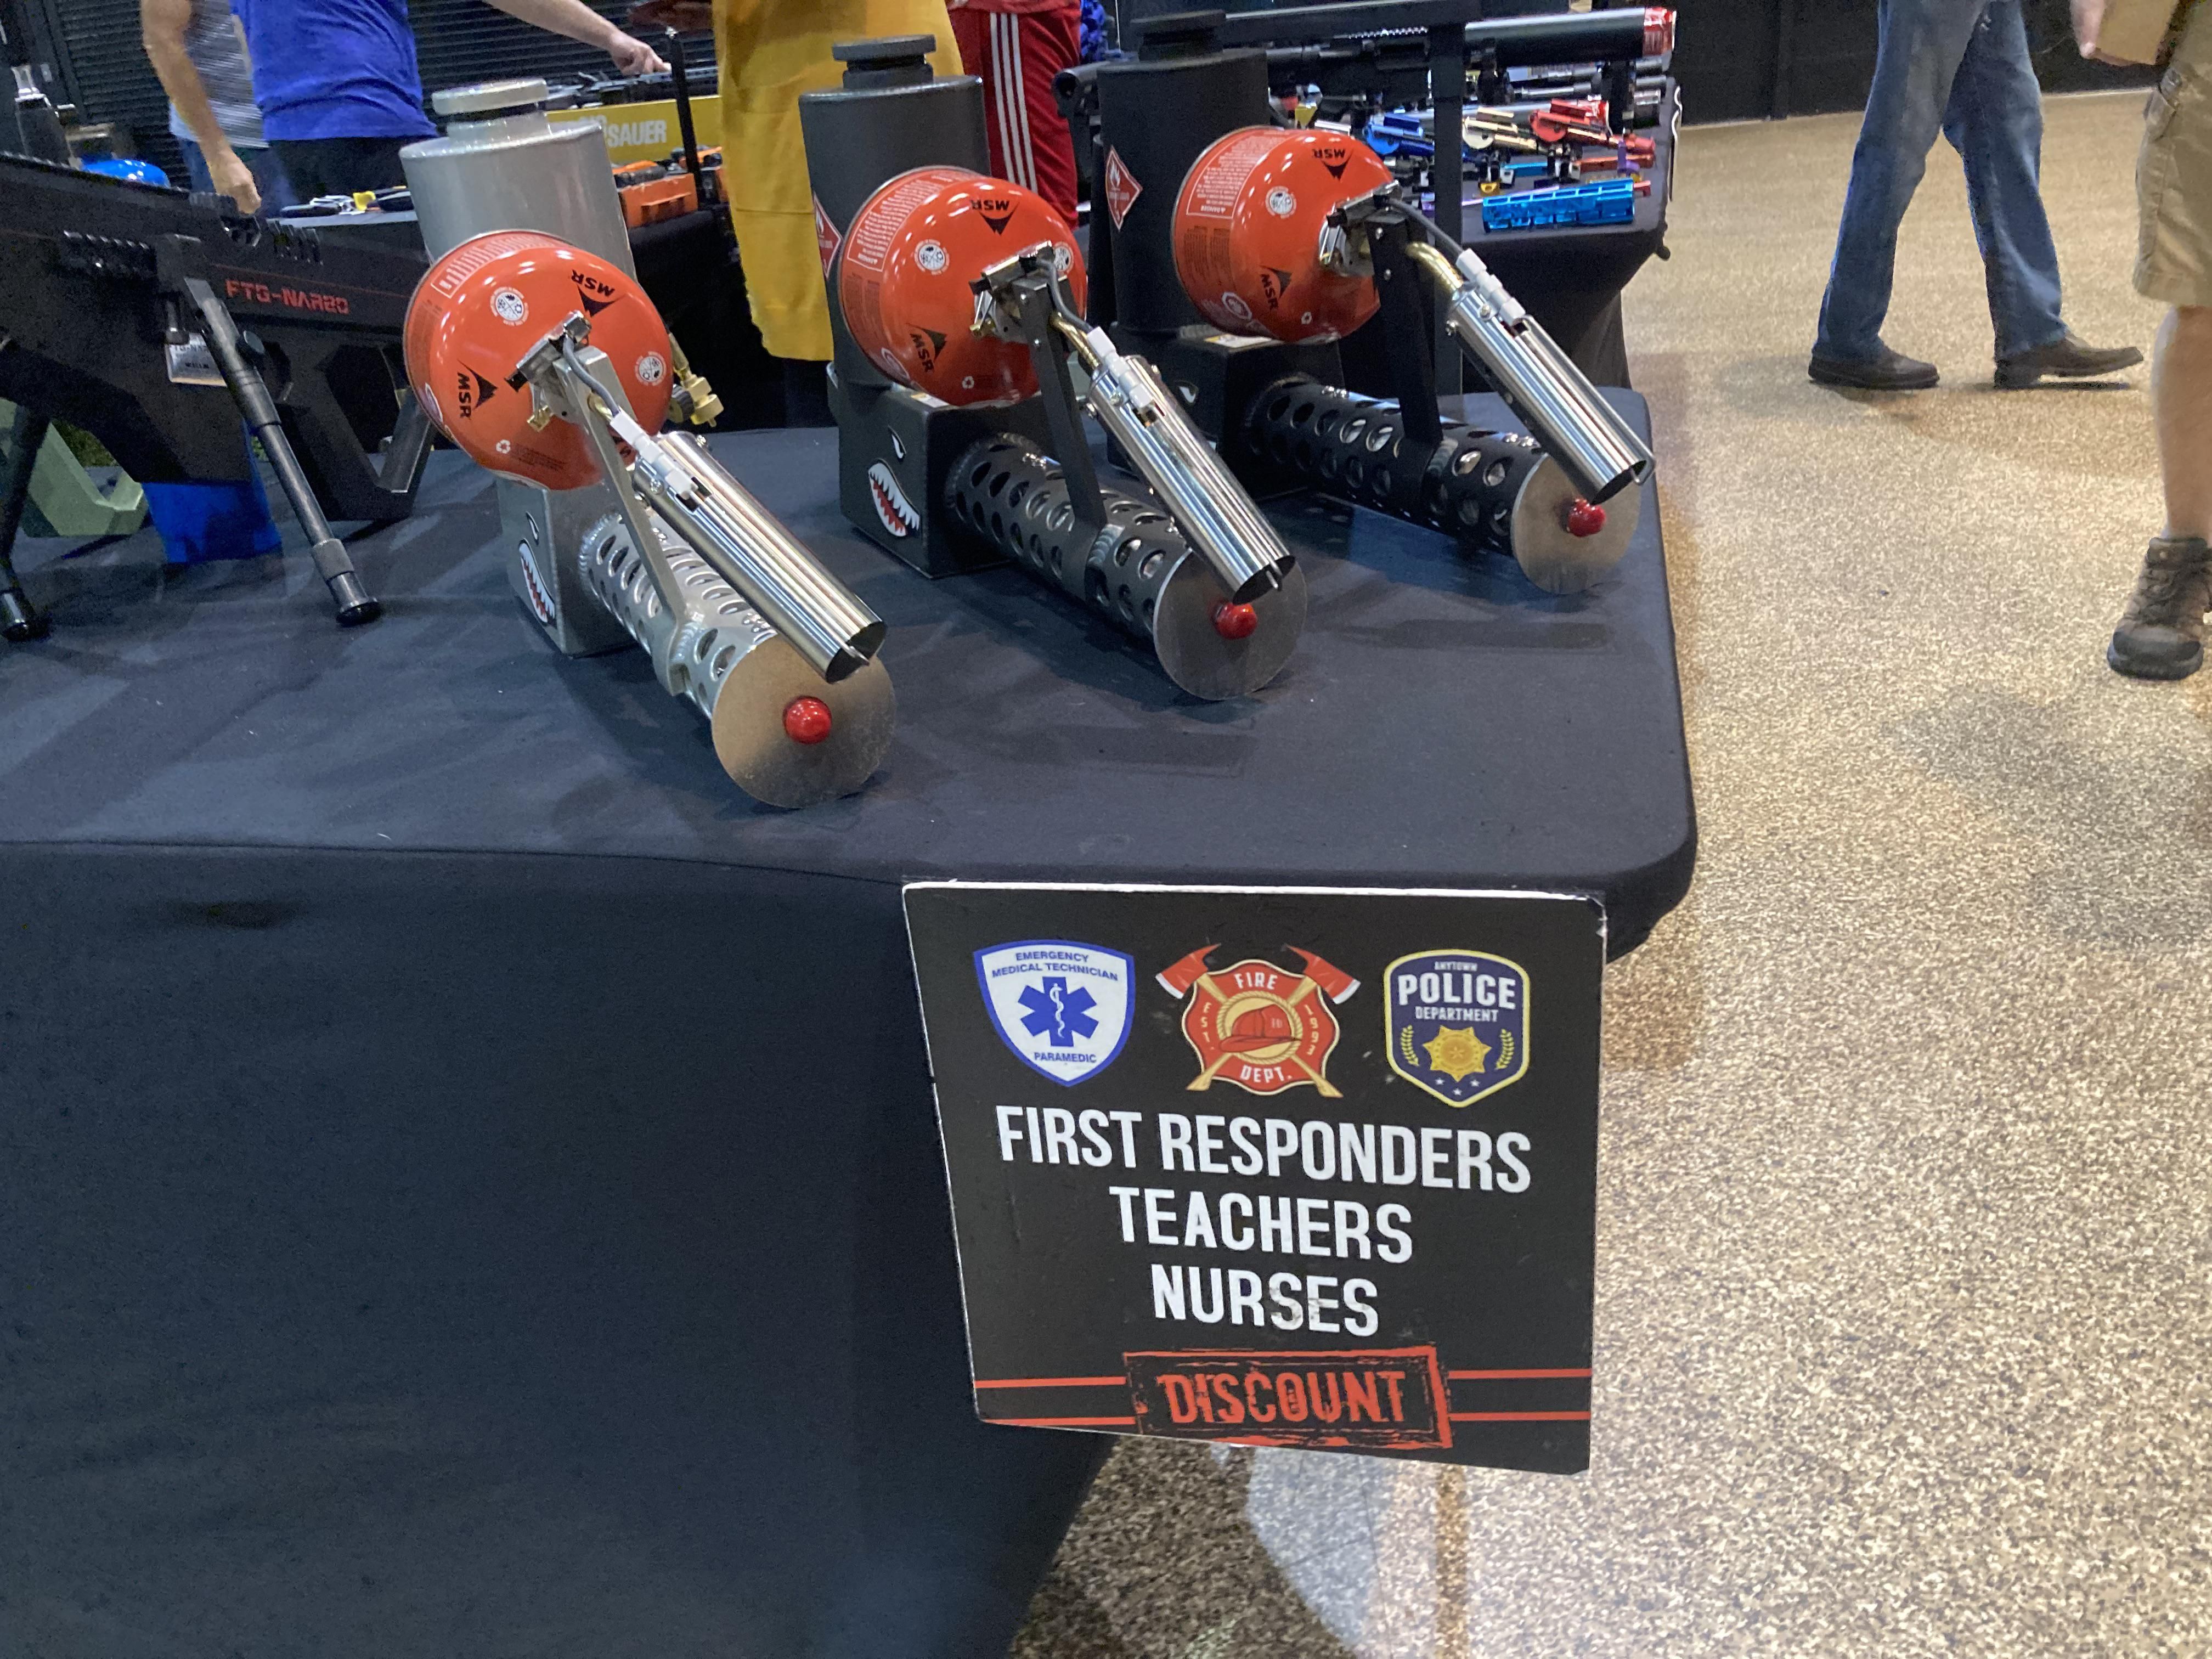 Teachers get a Discount on Flamethrowers: Guess Which State I am